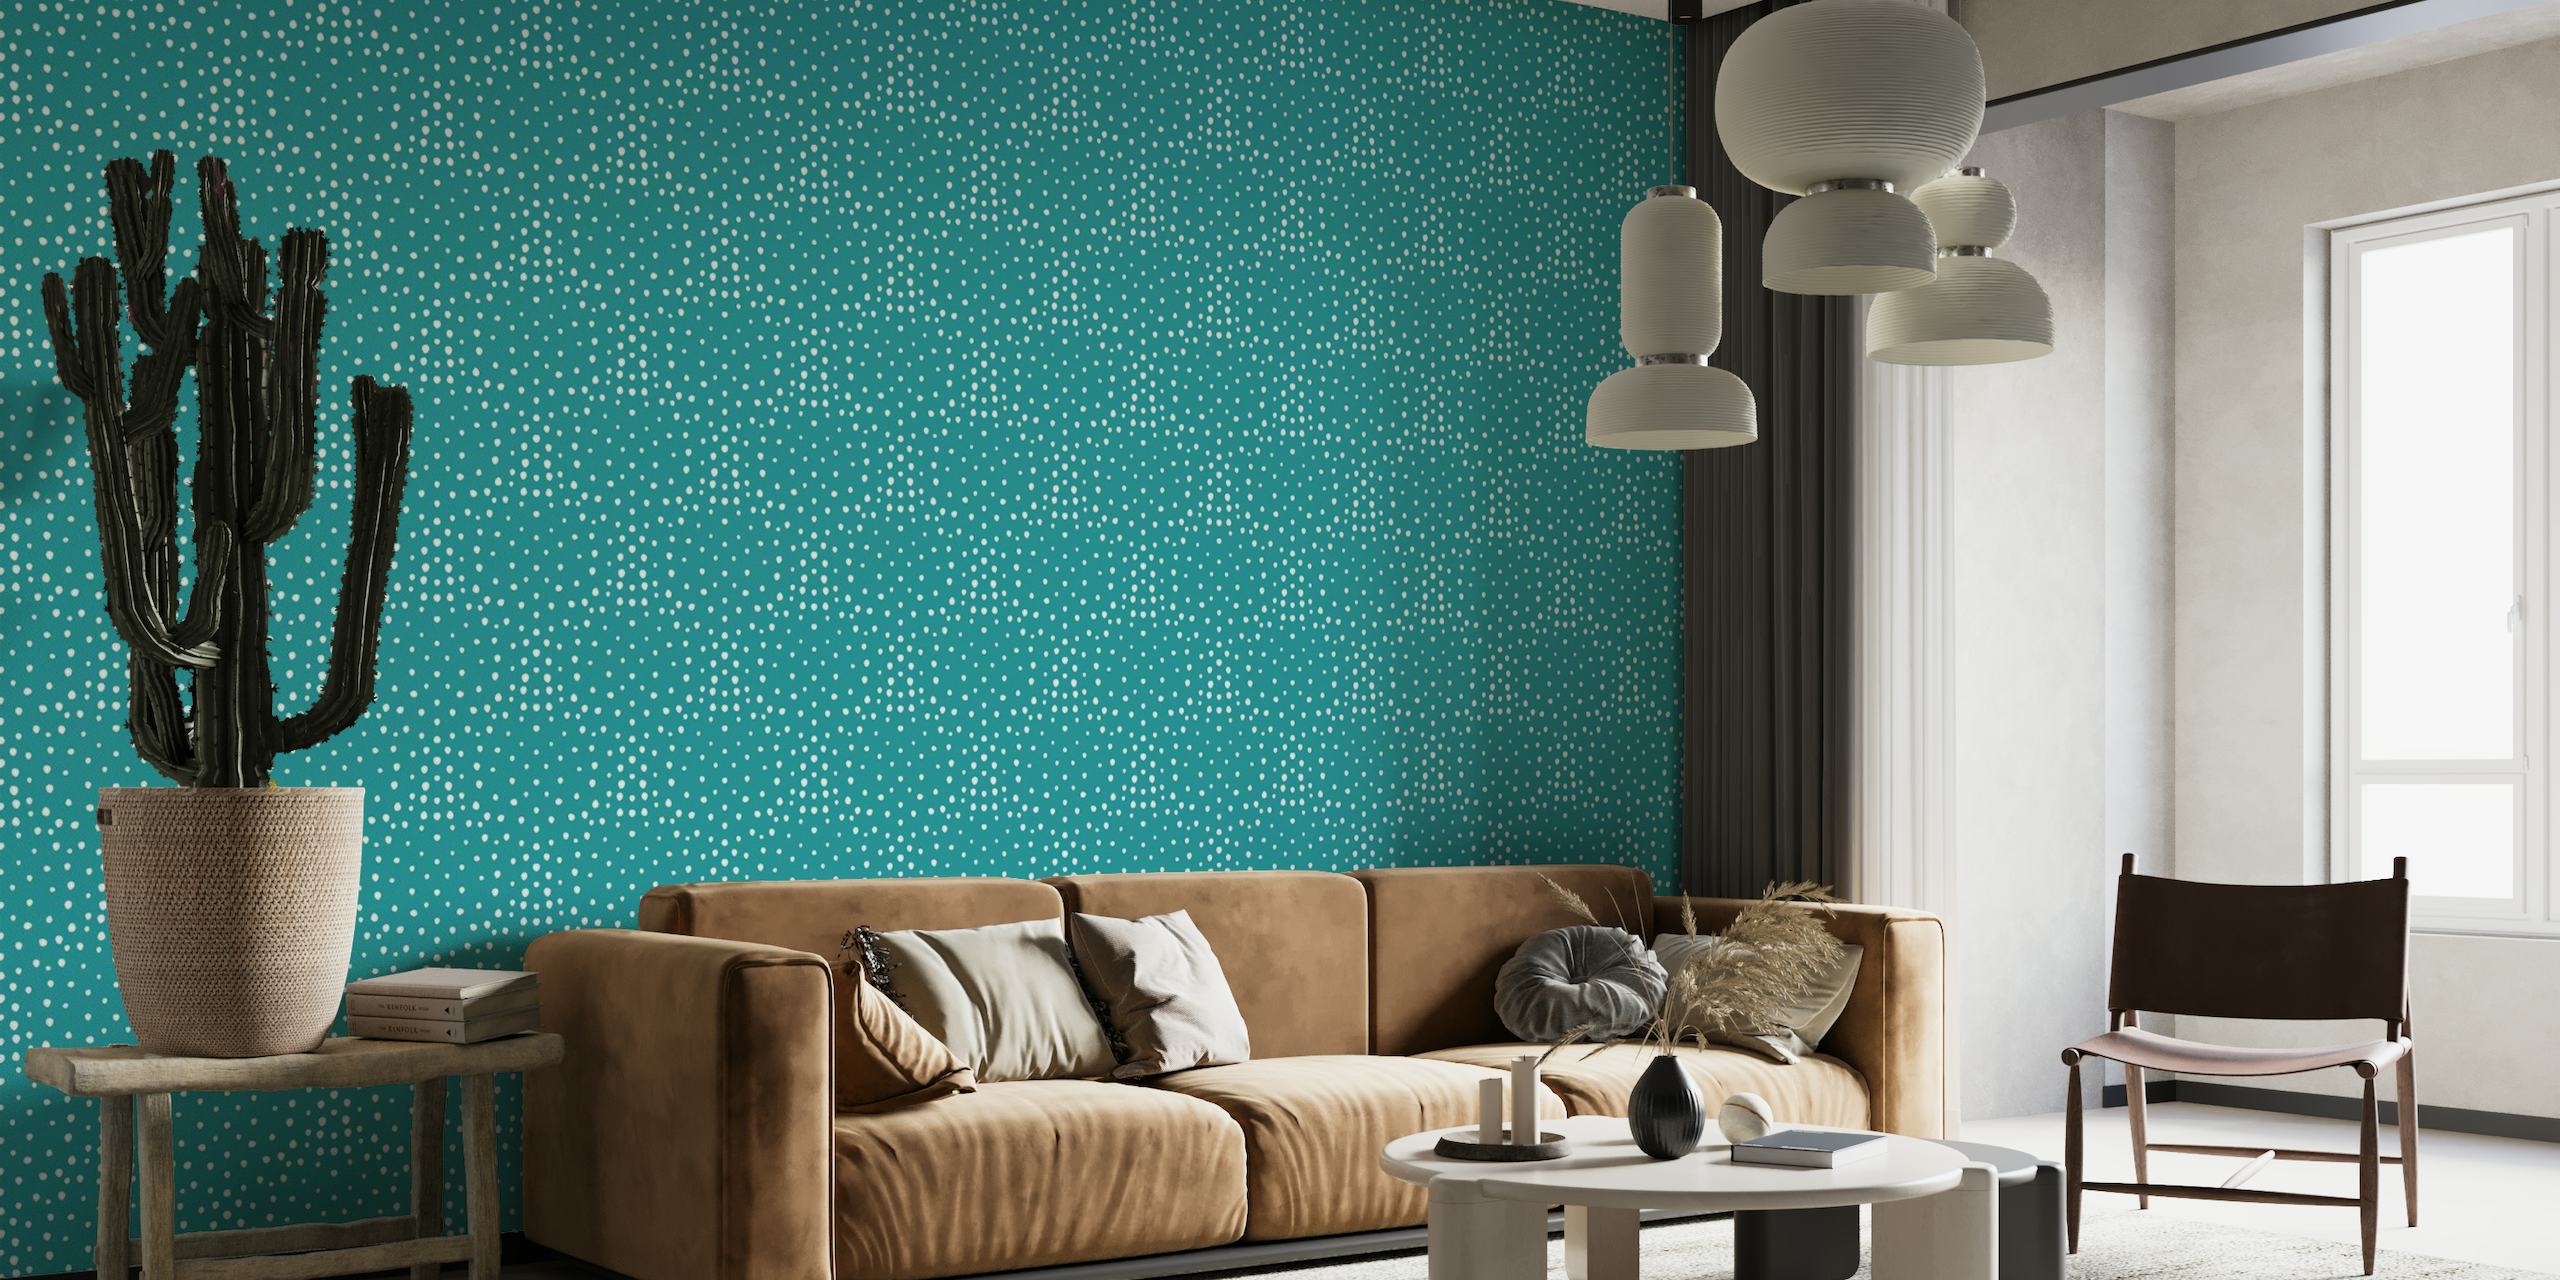 Turquoise Tranquility: Abstract Dots Blender Design - GD23-A17 behang